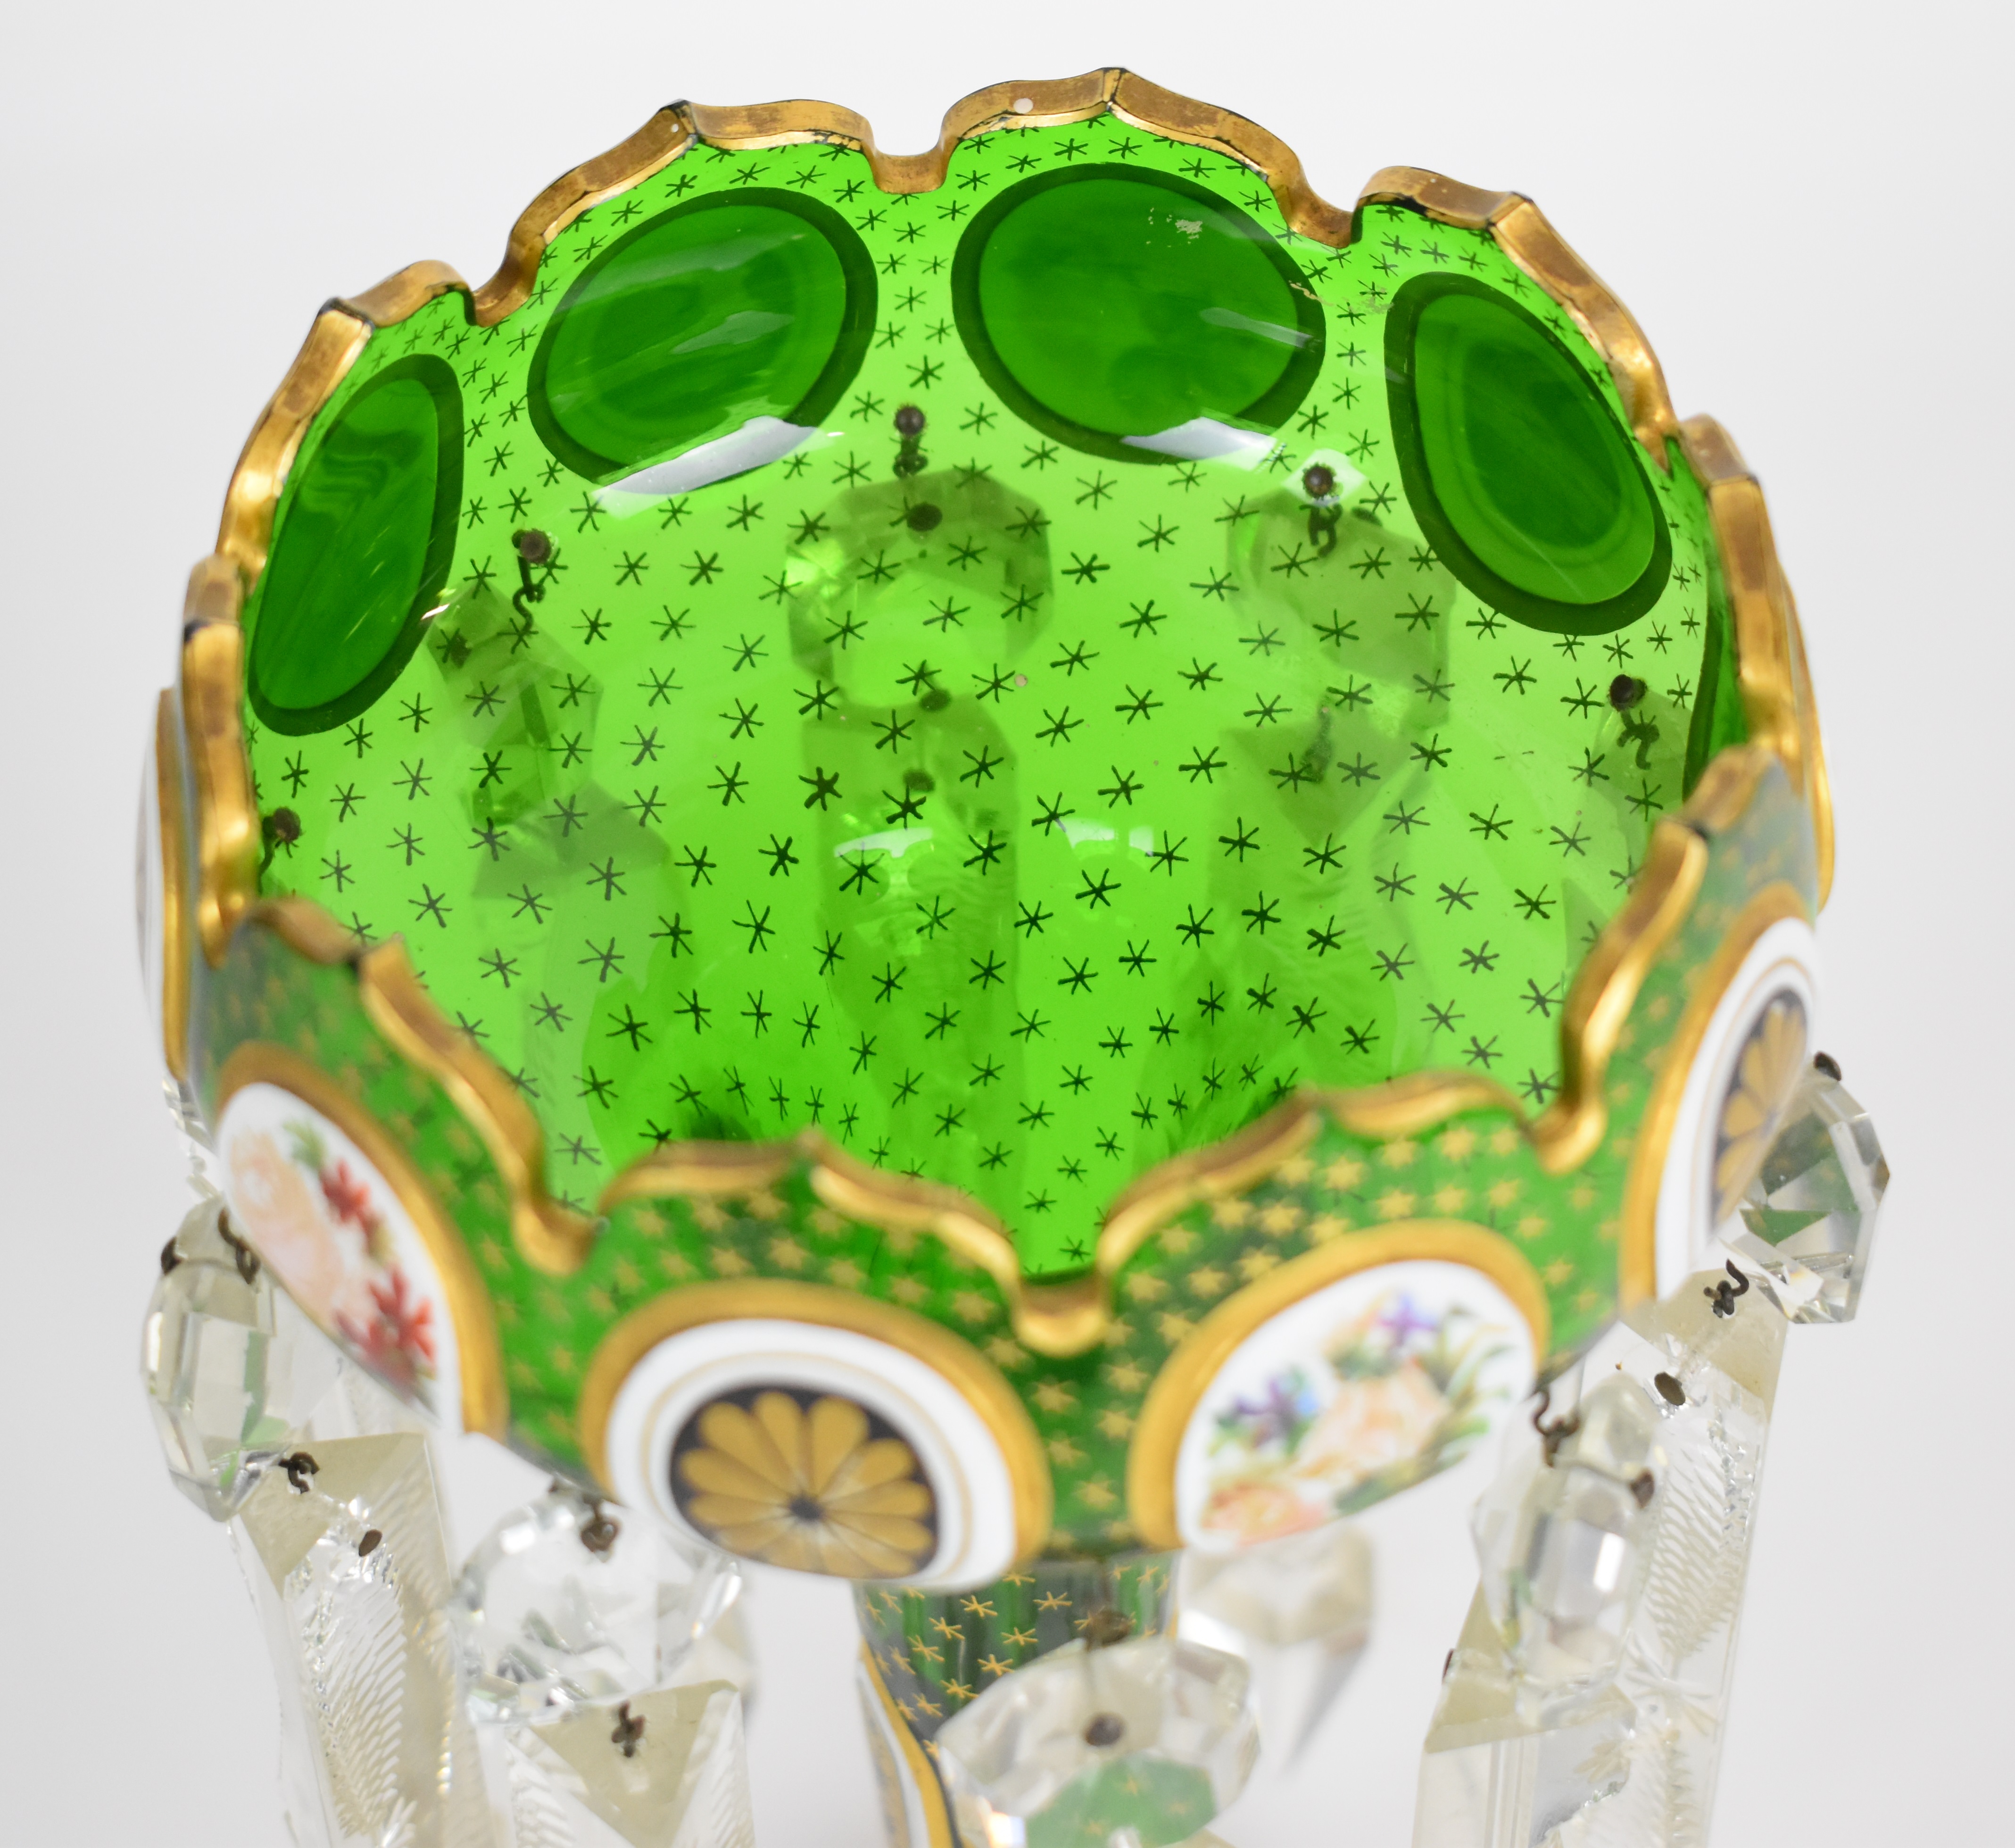 Victorian overlaid glass lustre vase with floral and gilt decoration over a green ground and clear - Image 6 of 6